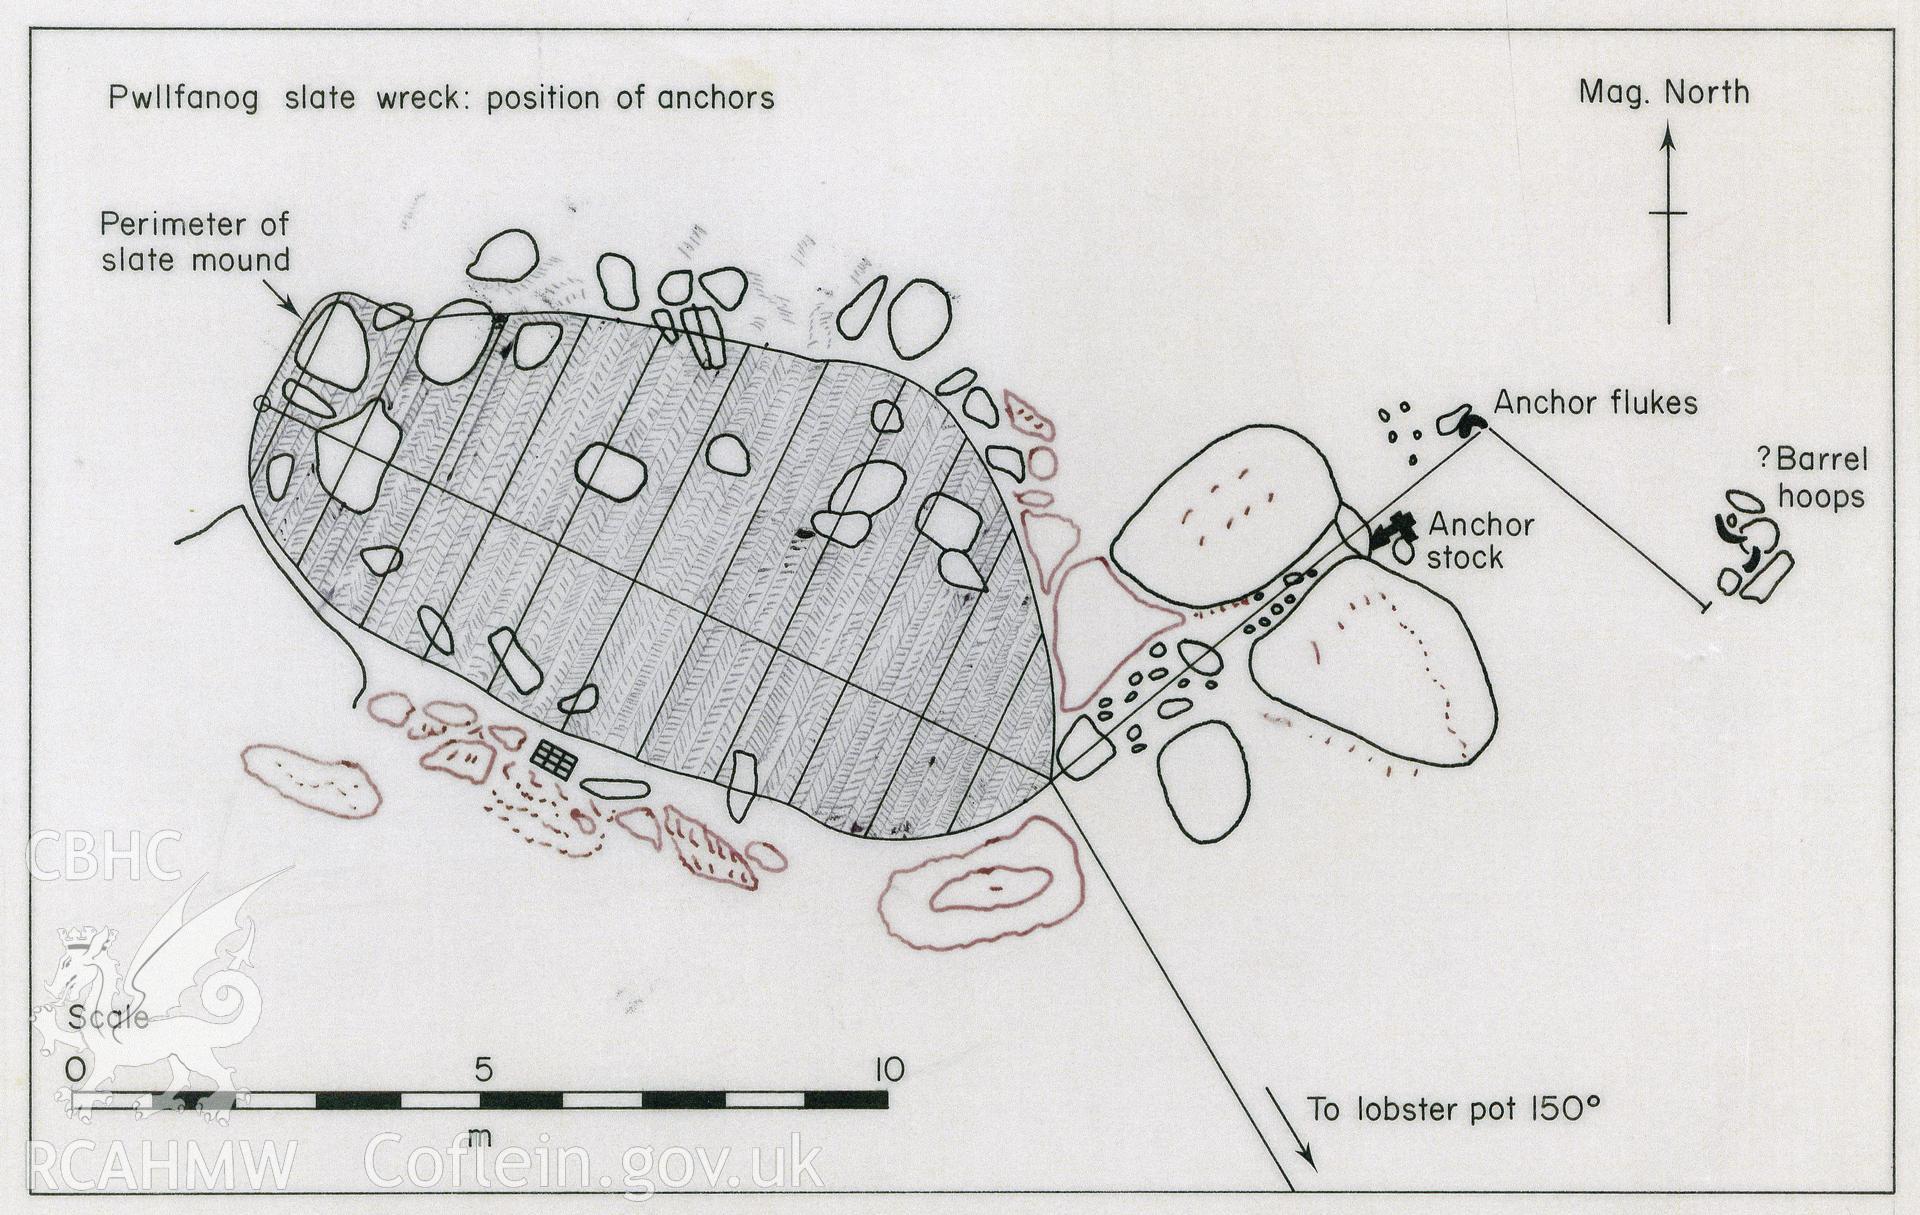 Digital copy of a coloured pen and ink diagram of Pwllfanog slate wreck loaned for publication by D C Jones.